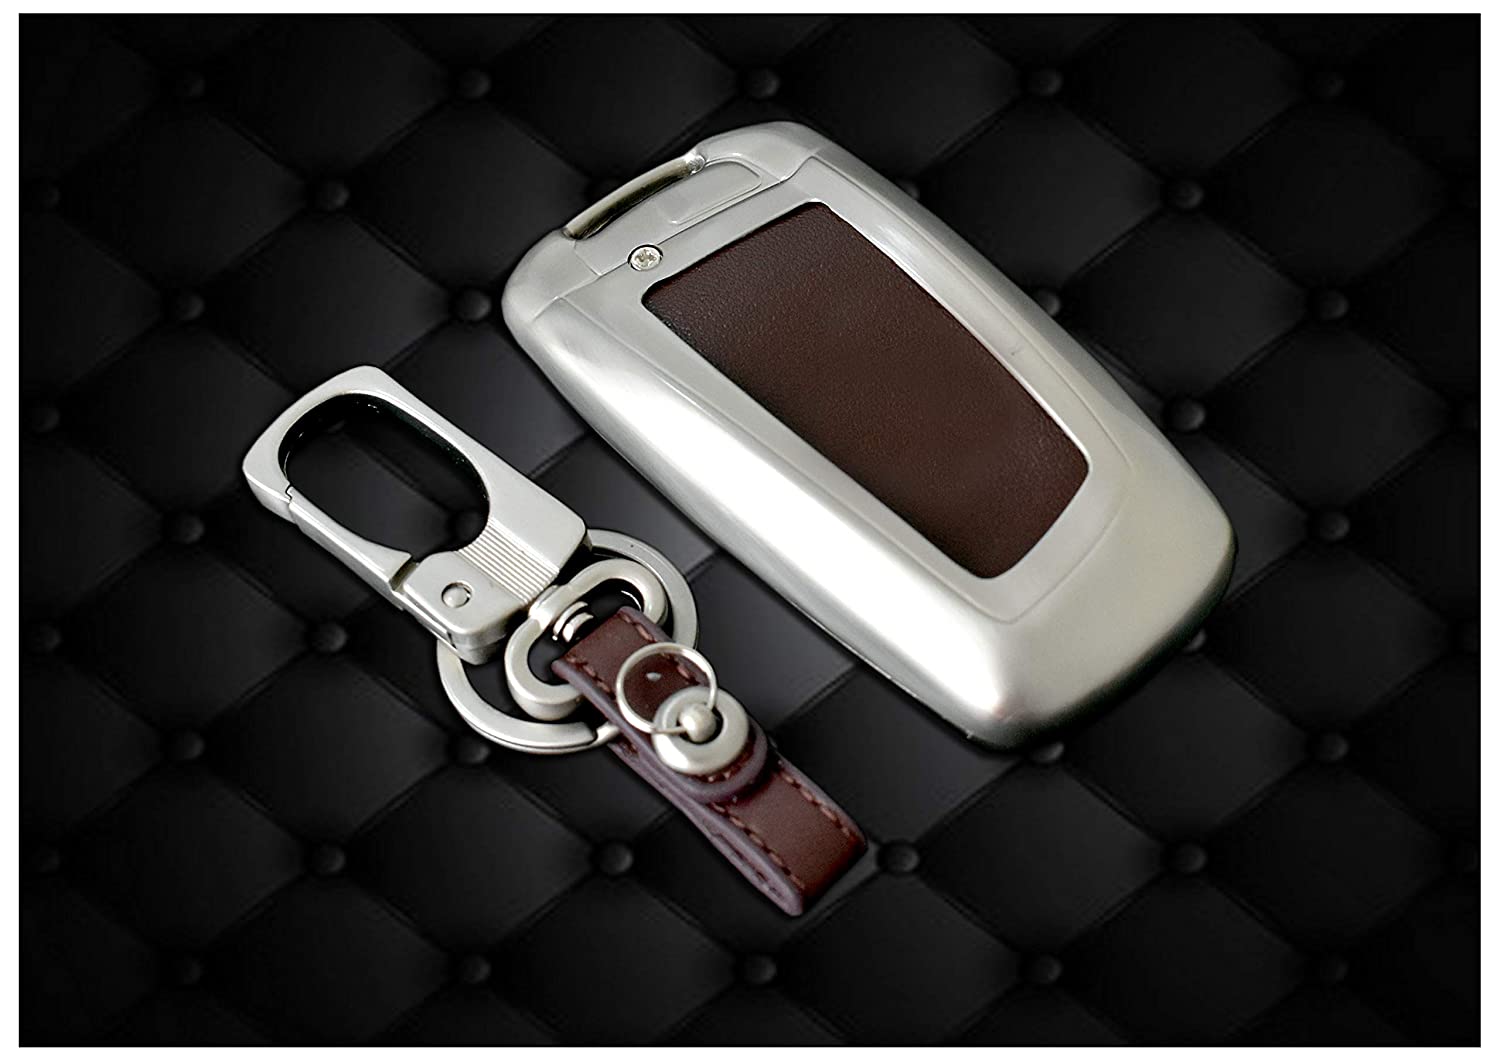 Car Remote Key Cover case fob for BMW 520LI GT 3 Series 7 Series X3 in Zinc Alloy and Leather Brown Color